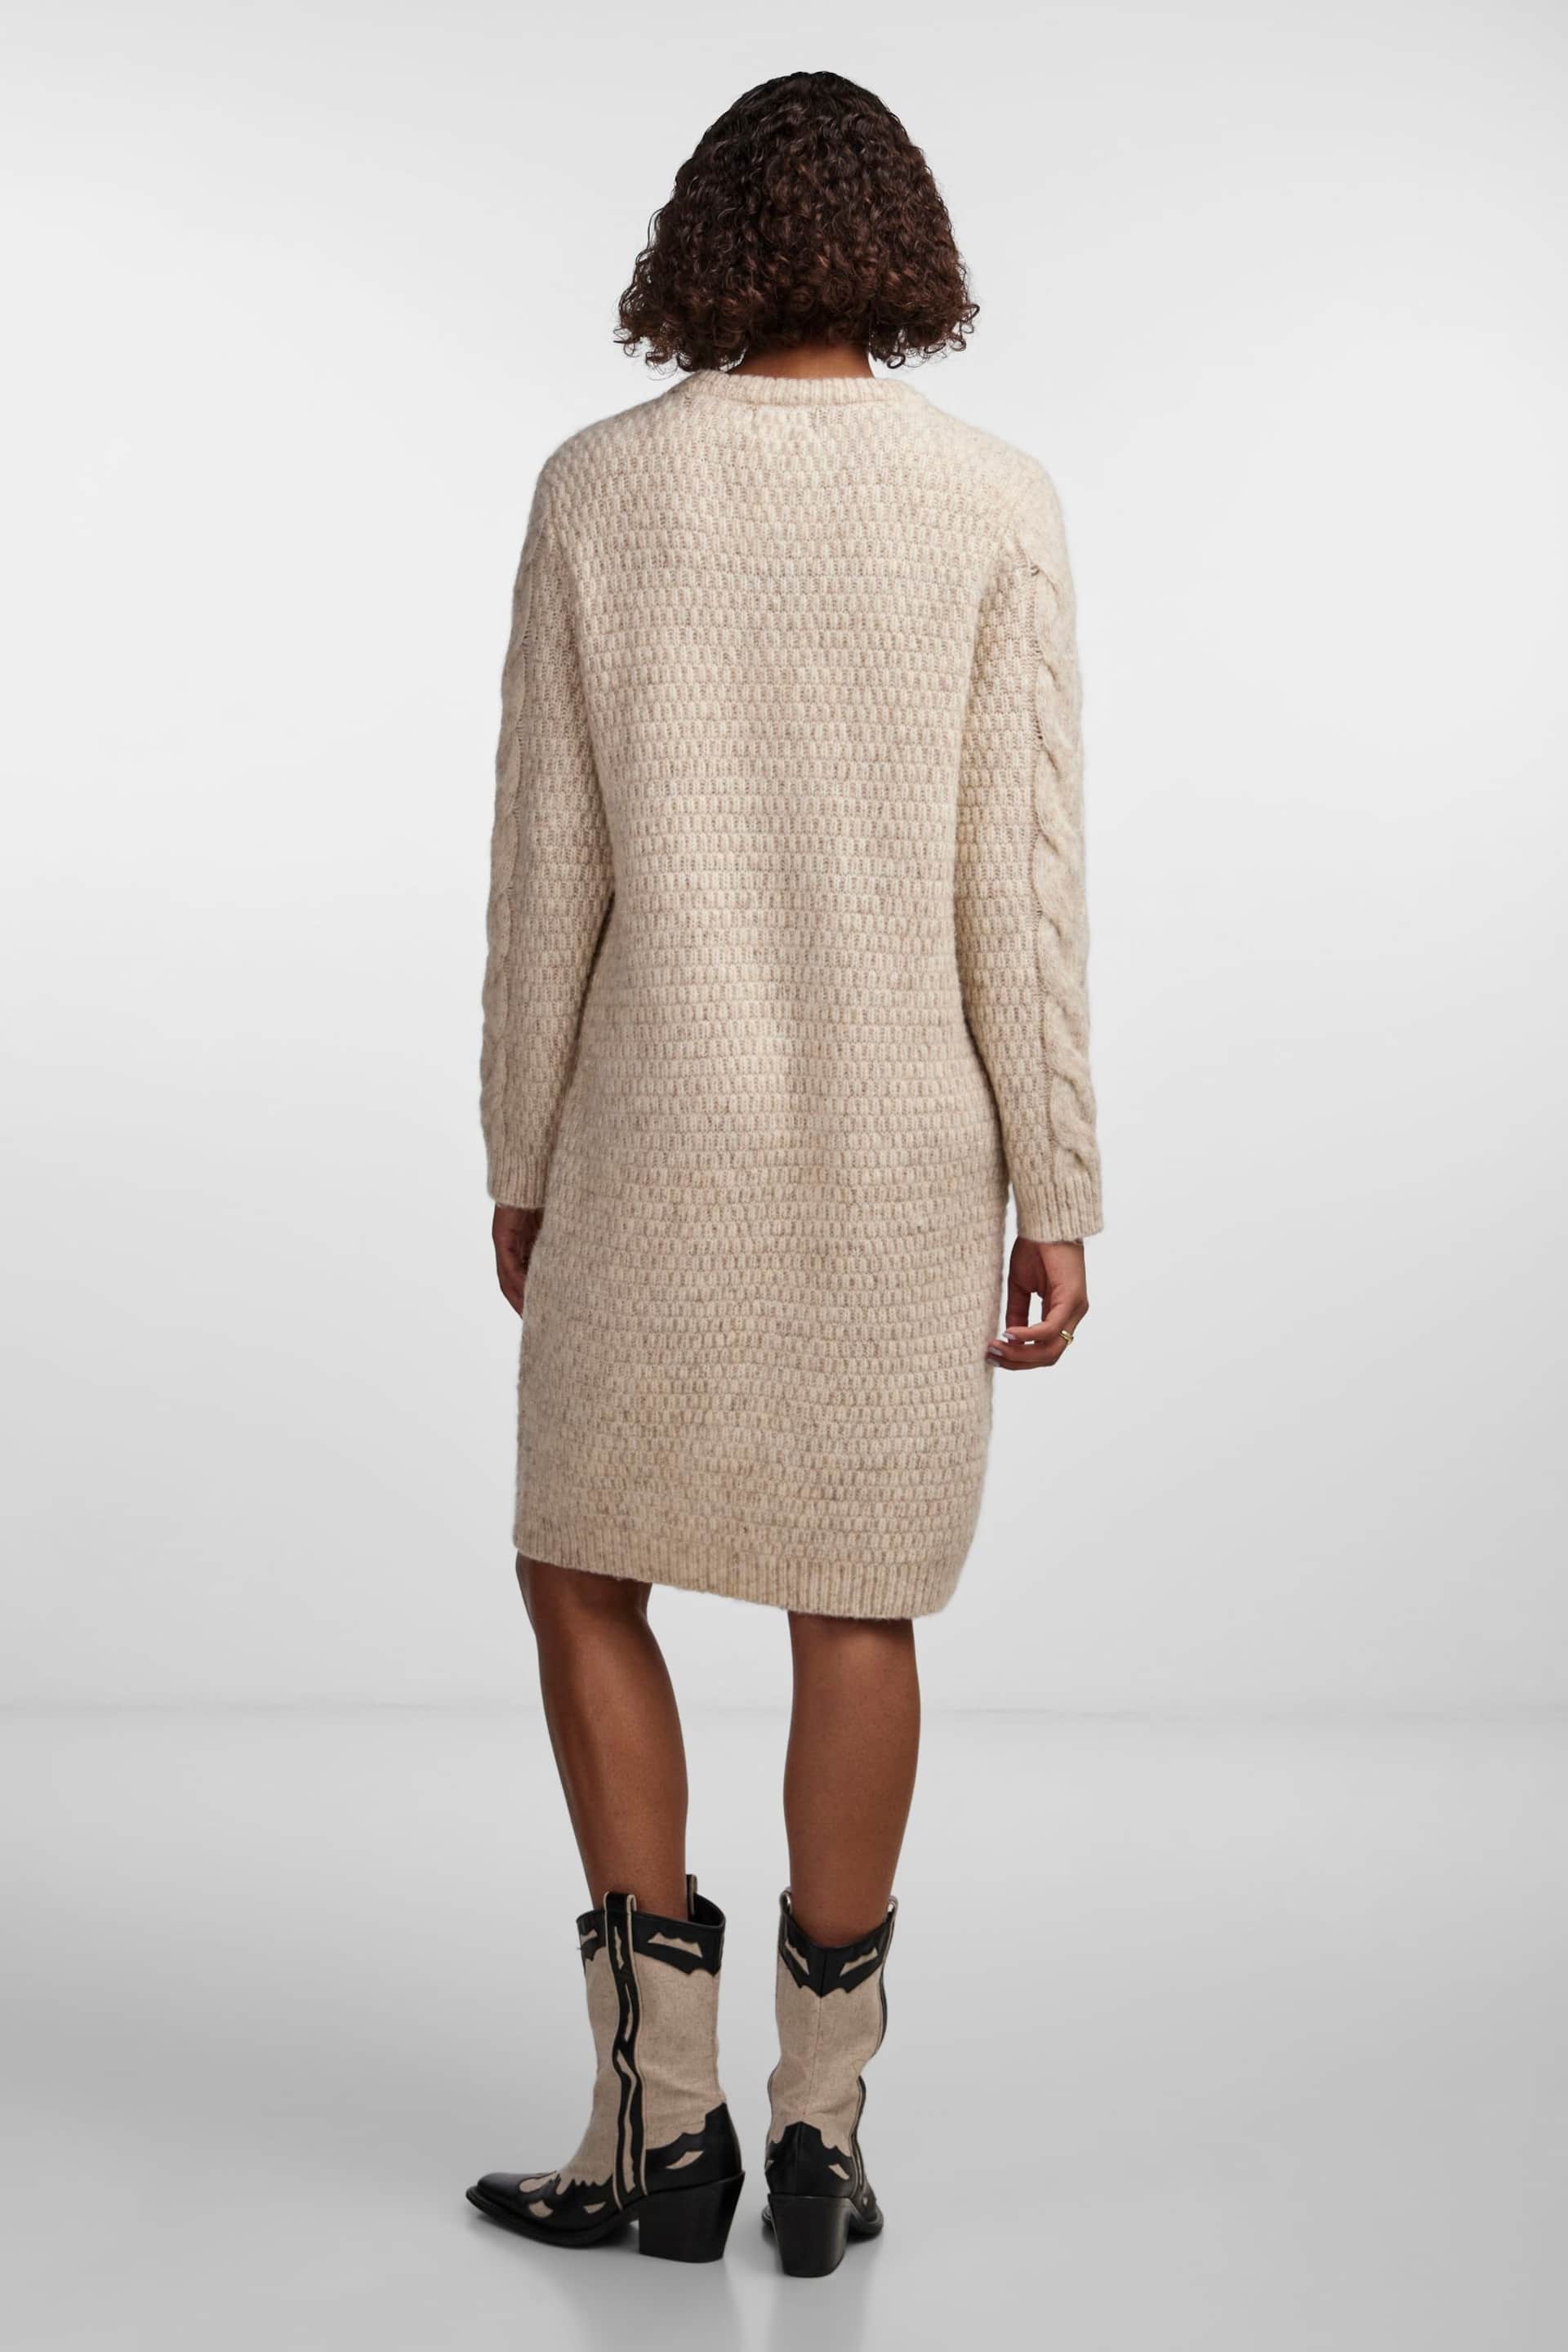 PIECES Cream Chunky Cable Knitted Jumper Dress - Image 2 of 5